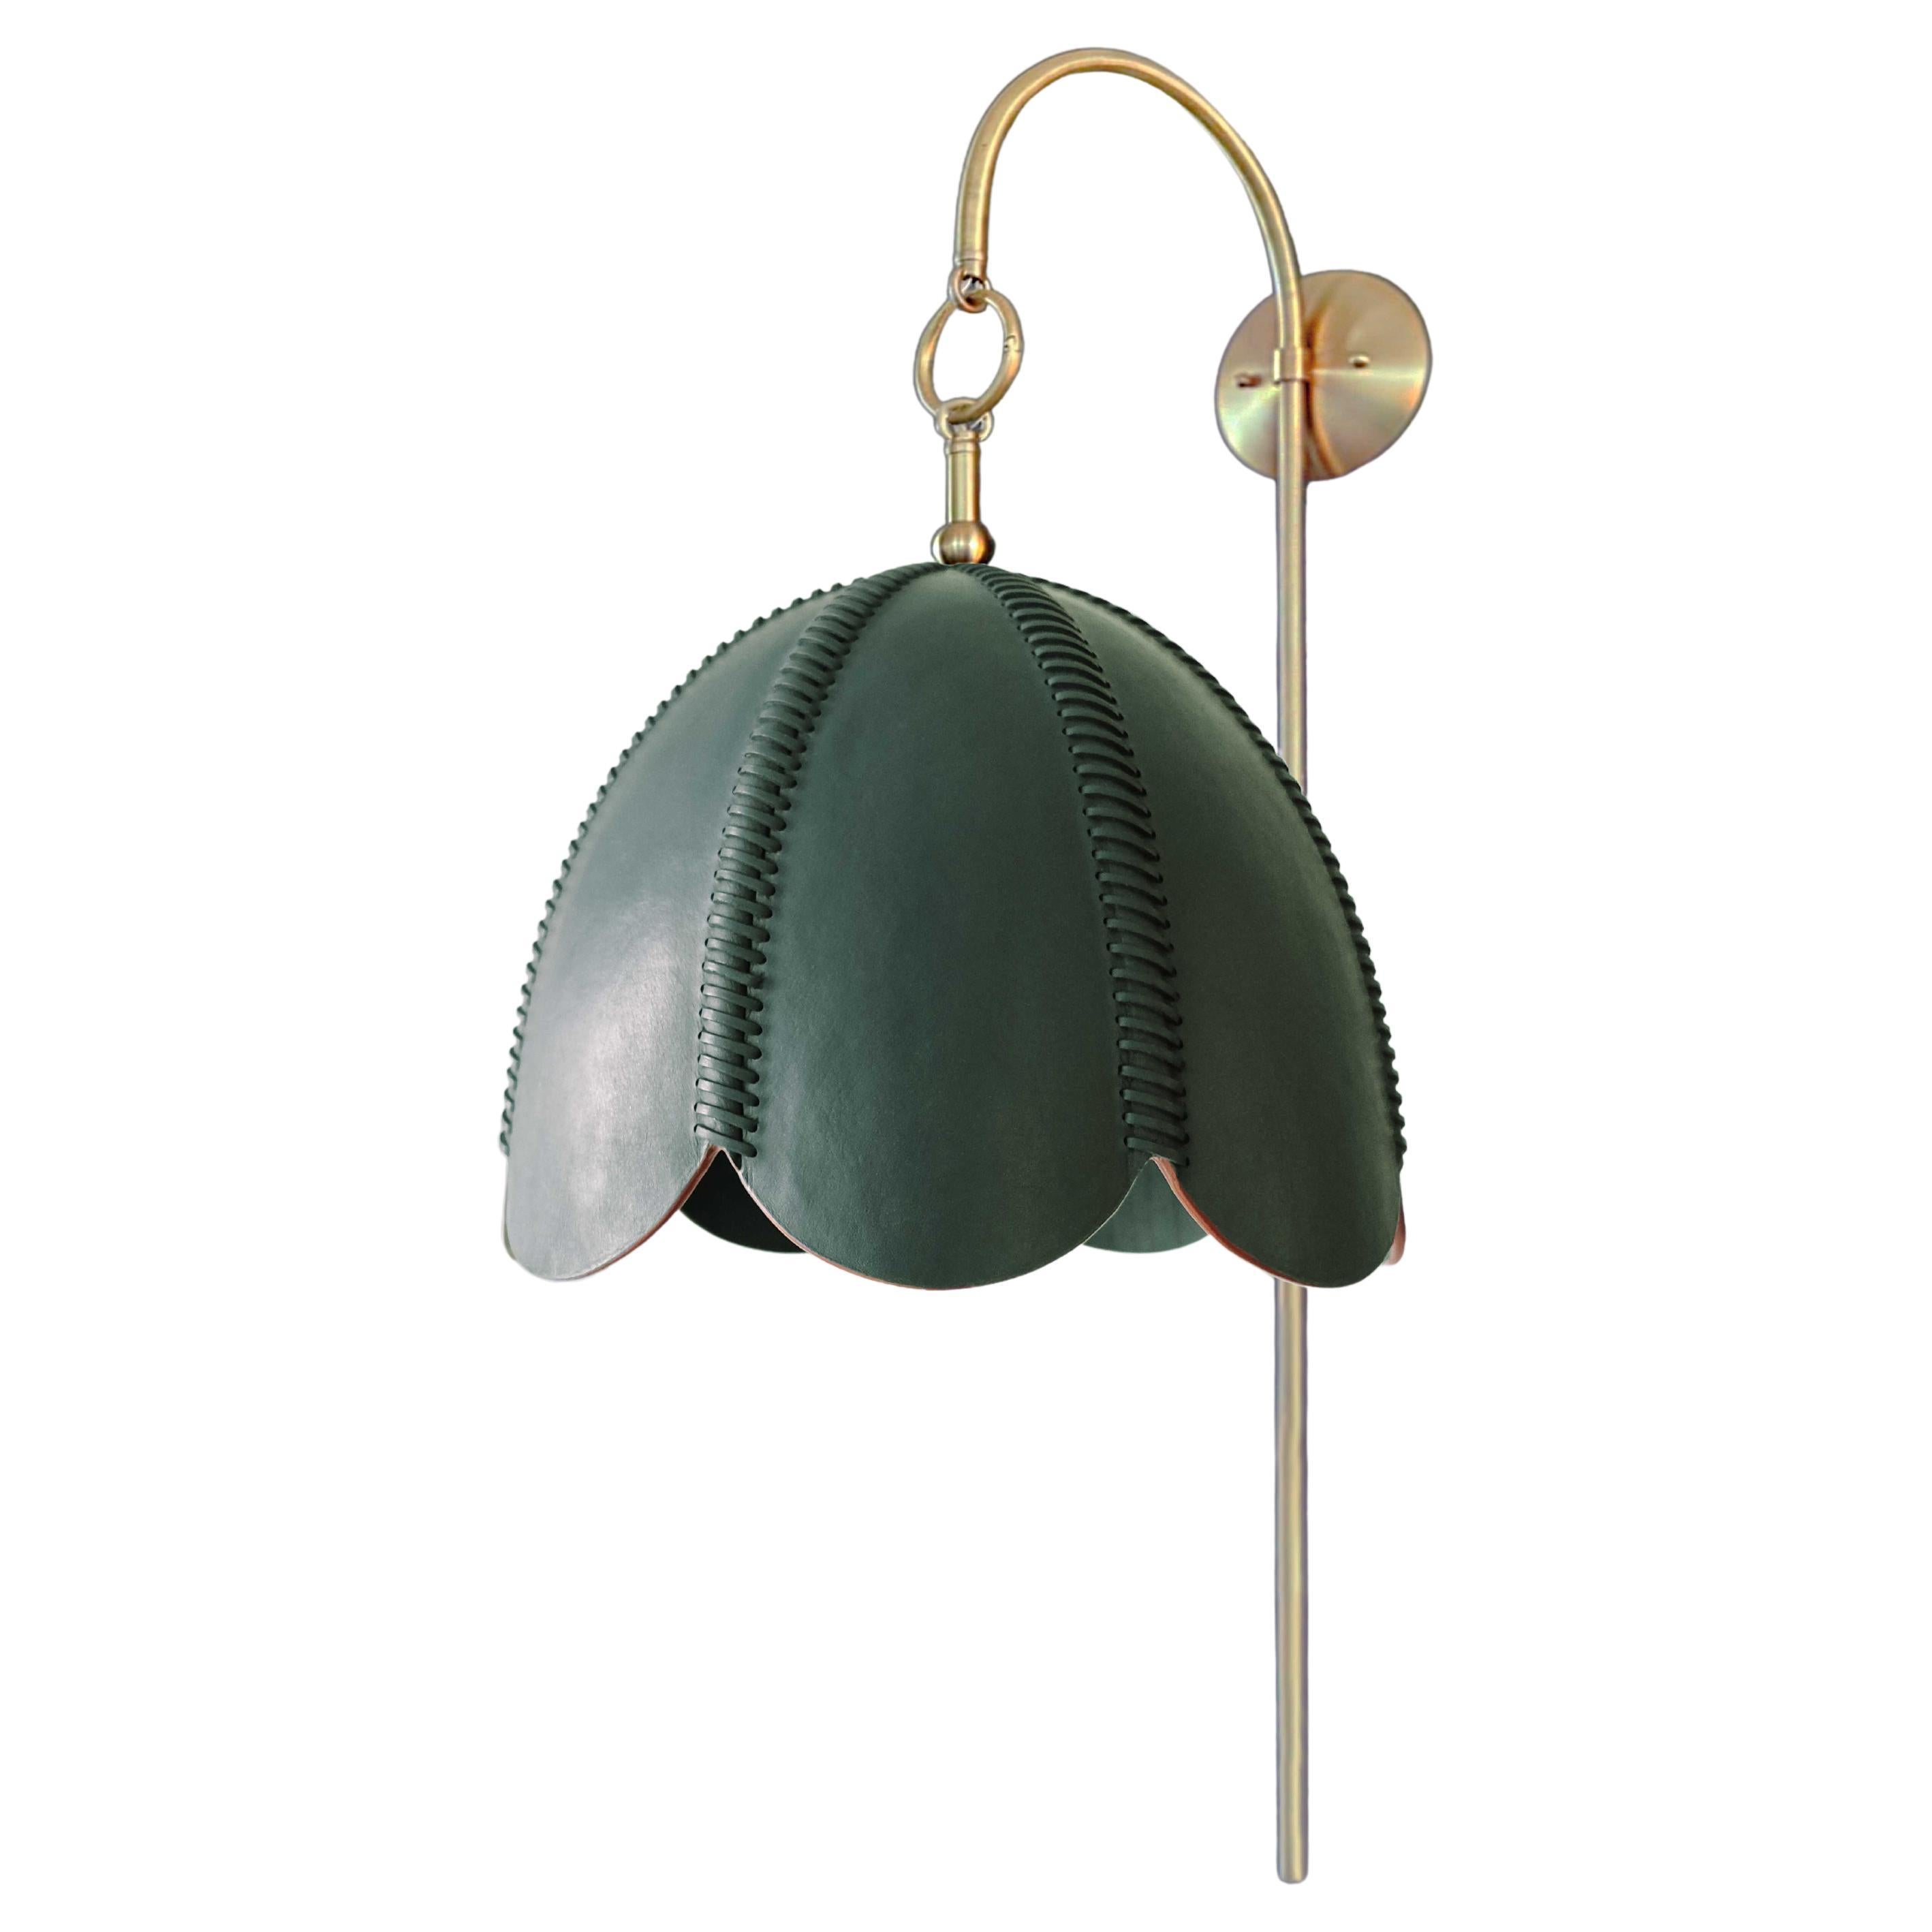 Leather Arched Sconce, Emerald Green, Large, Doma, Saddle Lamp Collection For Sale